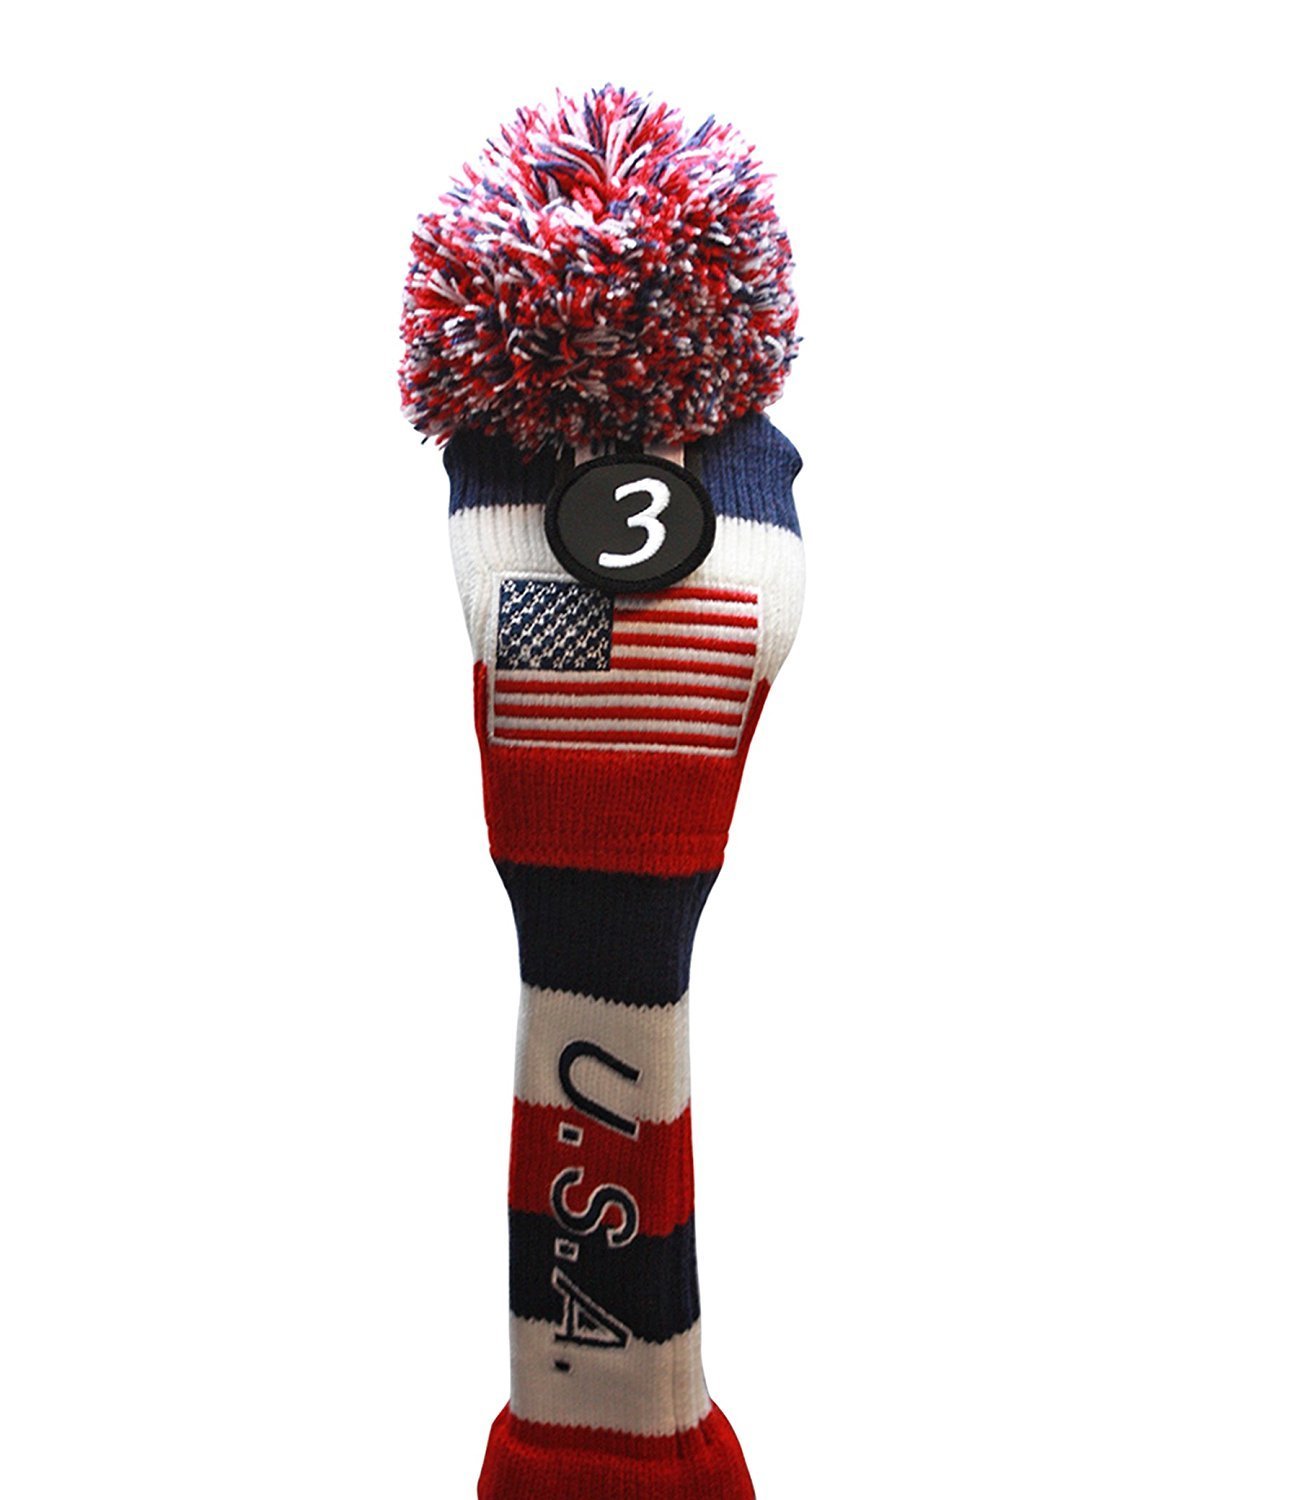 USA Majek Golf Driver 1 3 5 7 9 Fairway Woods Headcovers Pom Pom Knit Limited Edition Vintage Classic Traditional Flag Stars Red White Blue Stripes Retro Head Cover Fits 460cc Drivers and 260cc Woods - image 3 of 9